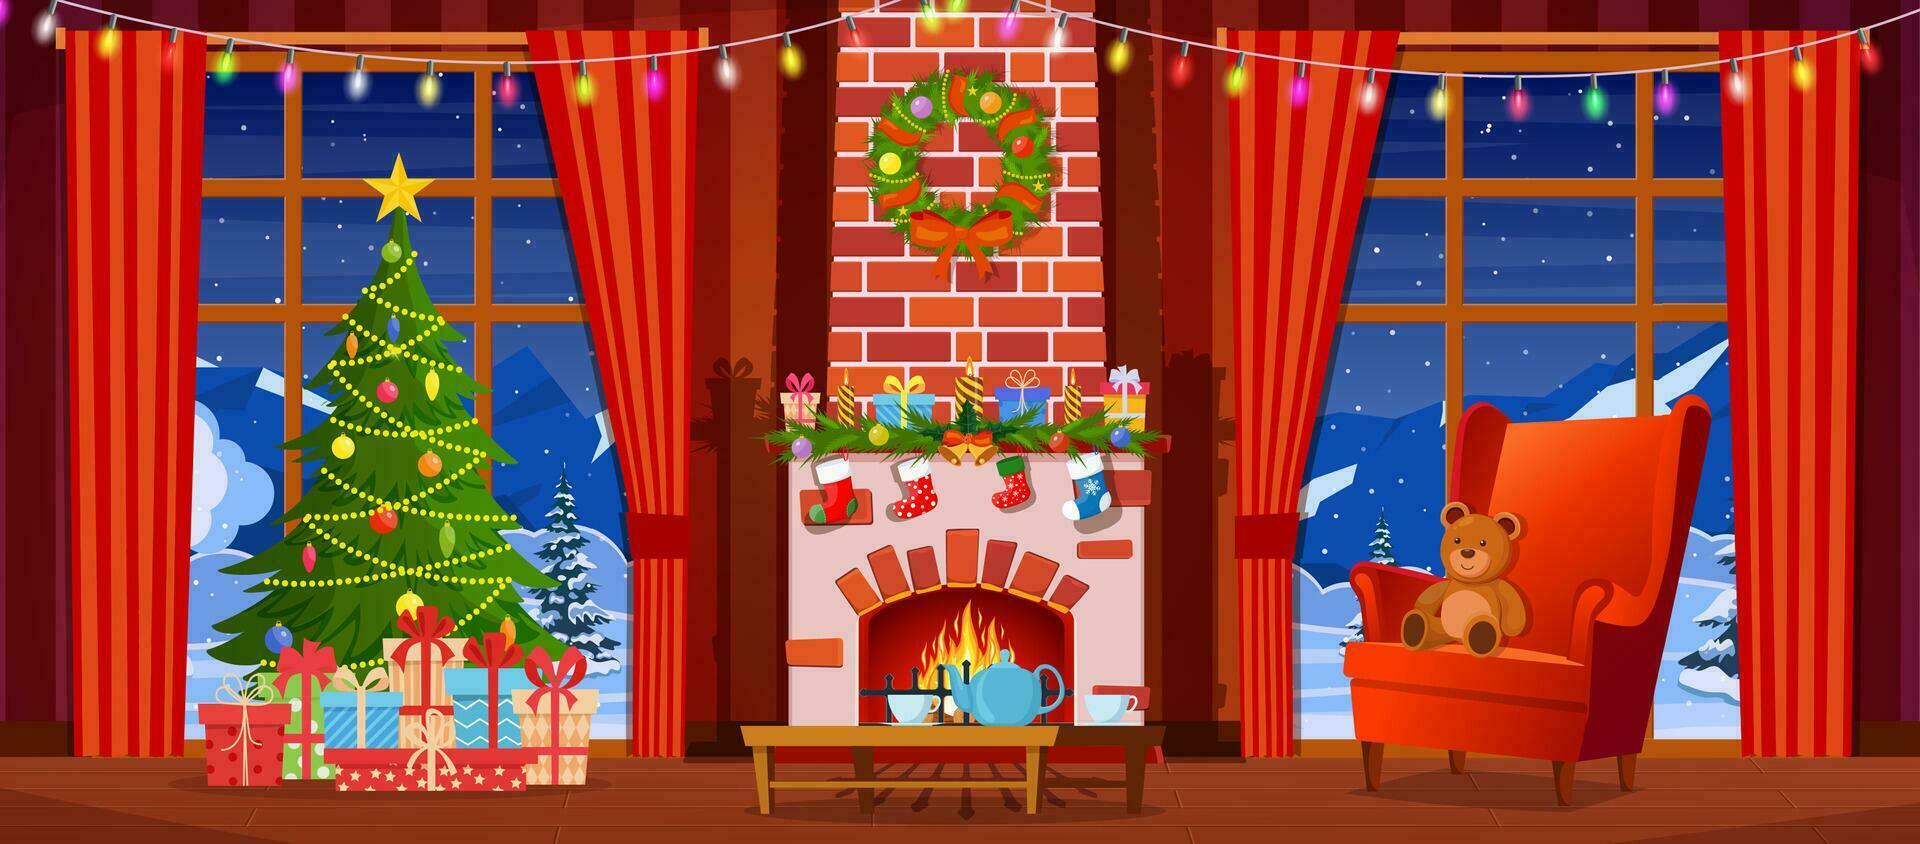 Cozy Interior of Living Room with Window, Man on Armchair, Table, Christmas Tree. Happy New Year Decoration. Merry Christmas Holiday. New Year and Xmas Celebration. Cartoon Flat Vector Illustration